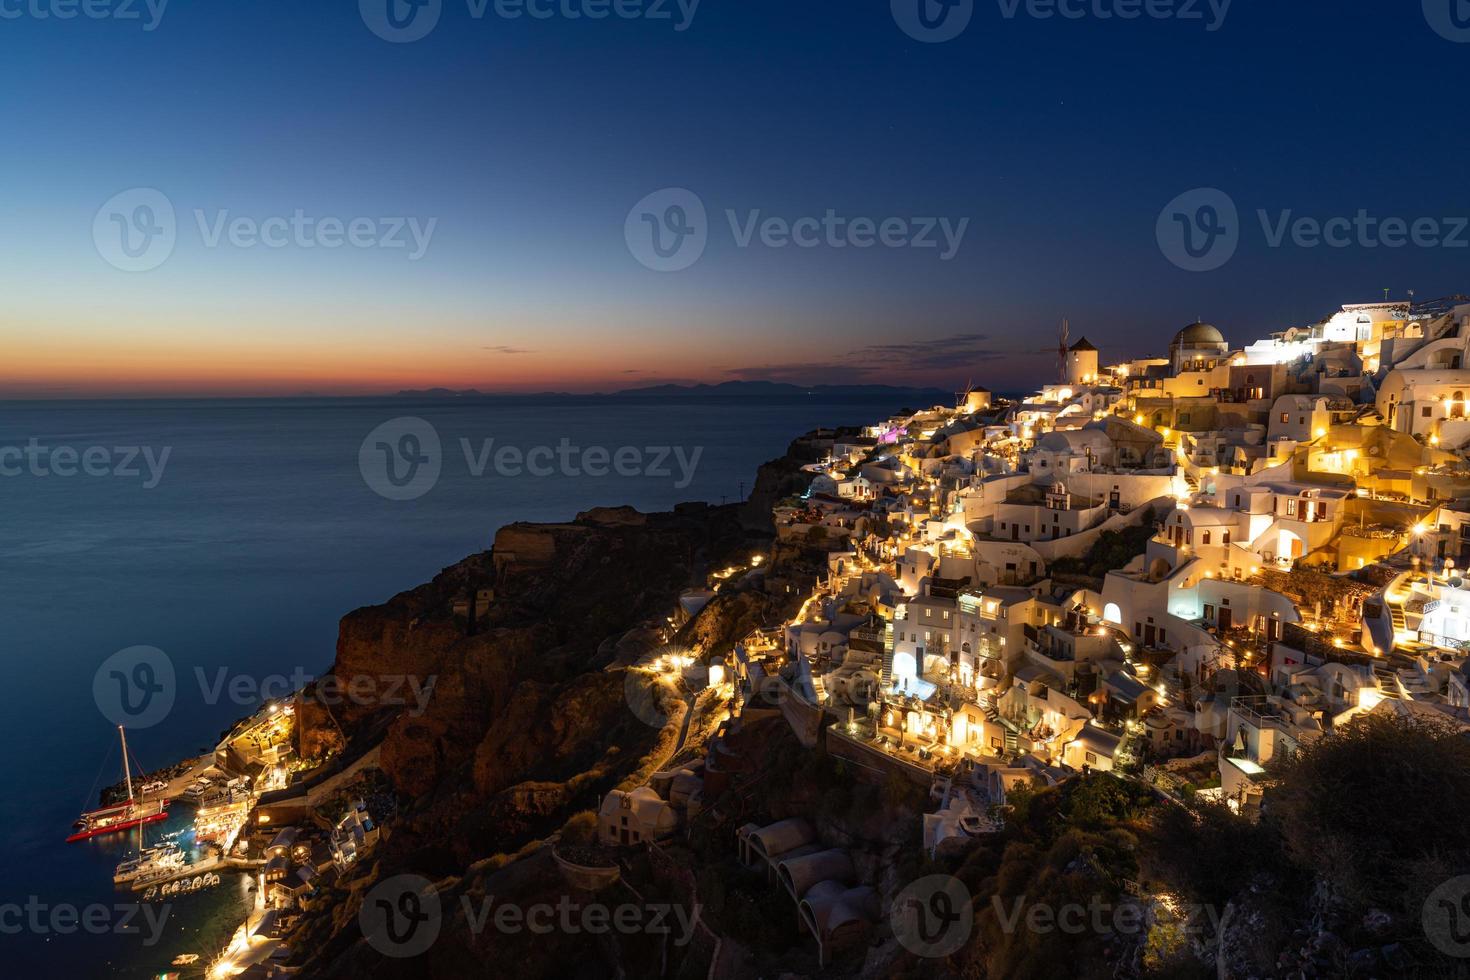 Oia village Santorini with blue domes and white washed house after sunset at the Island of Santorini Greece Europe, sunrise Santorini photo